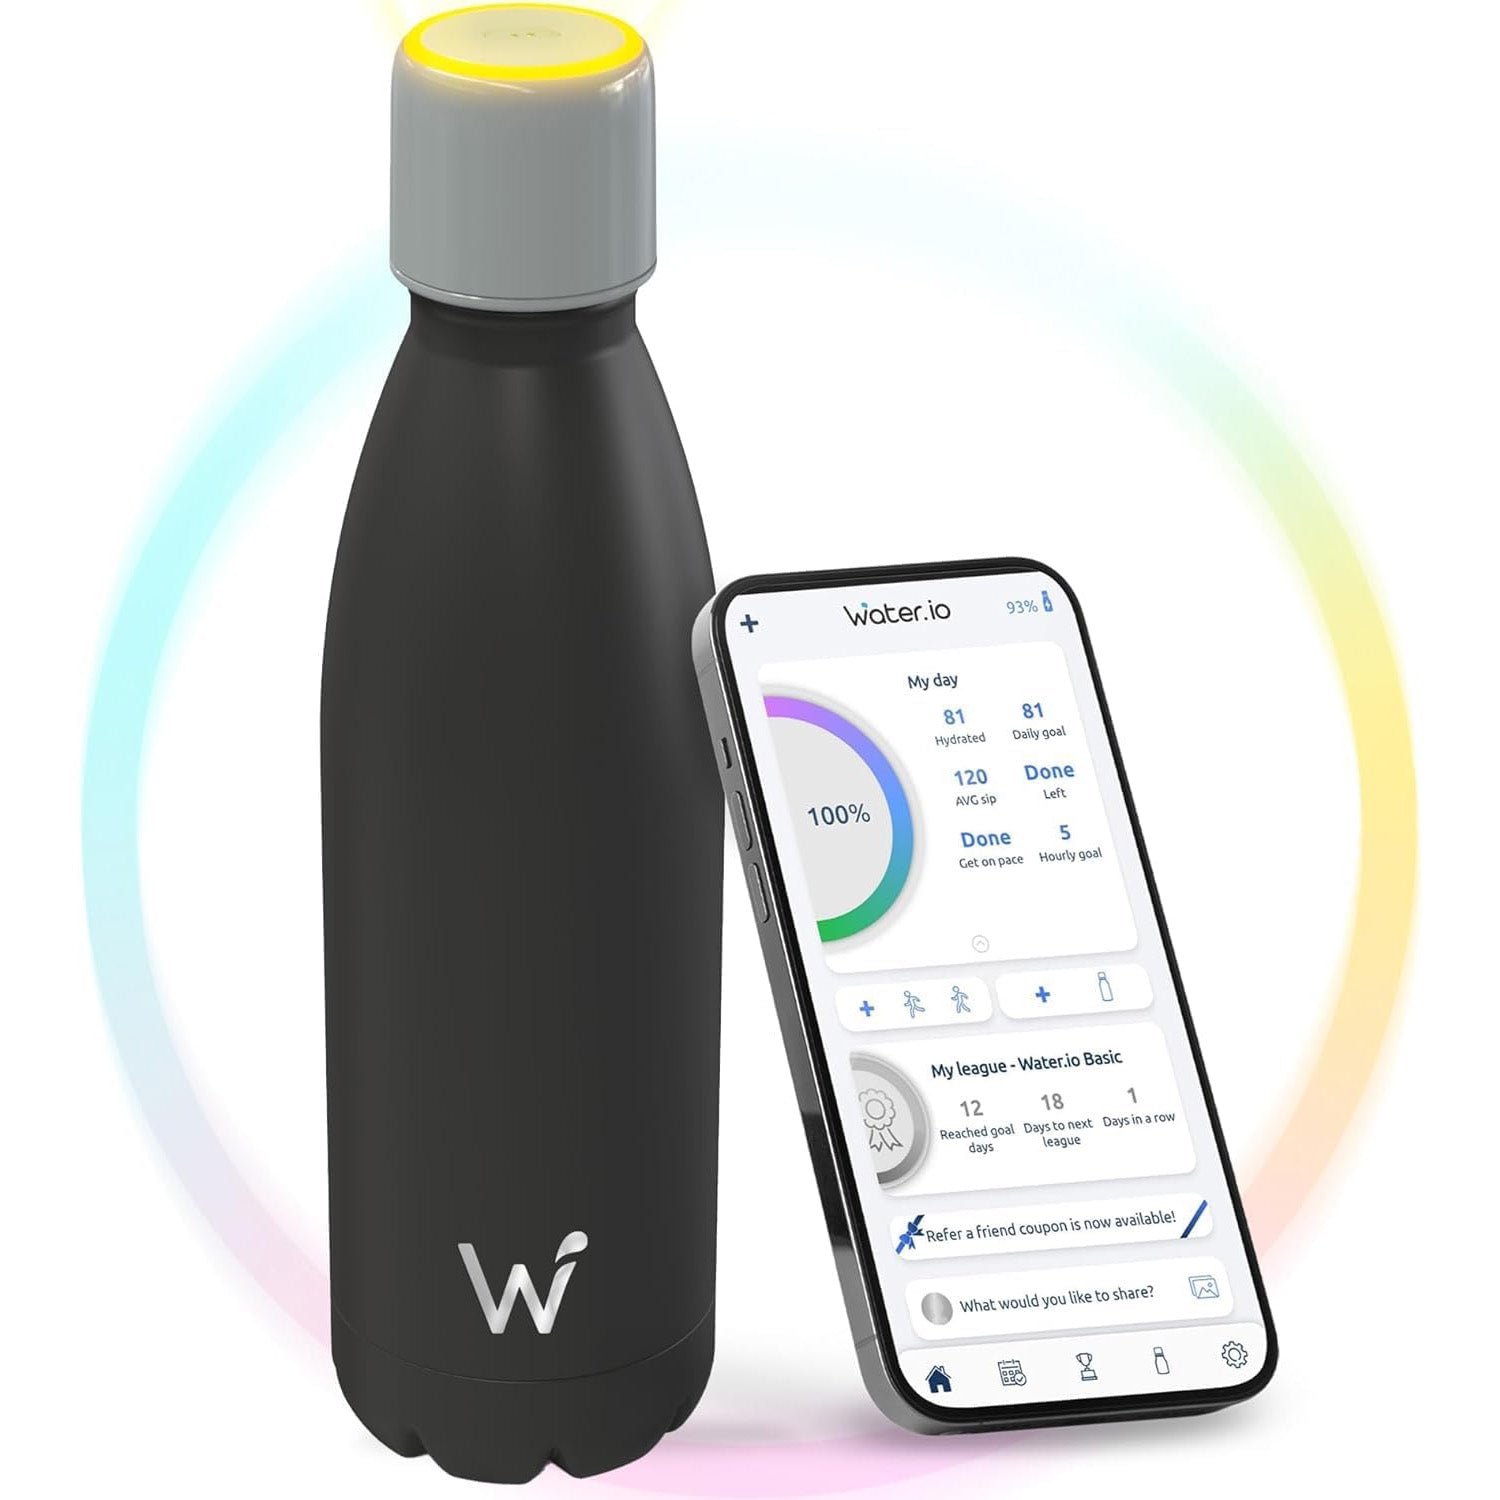 The smart water bottle by water.io - Water.io